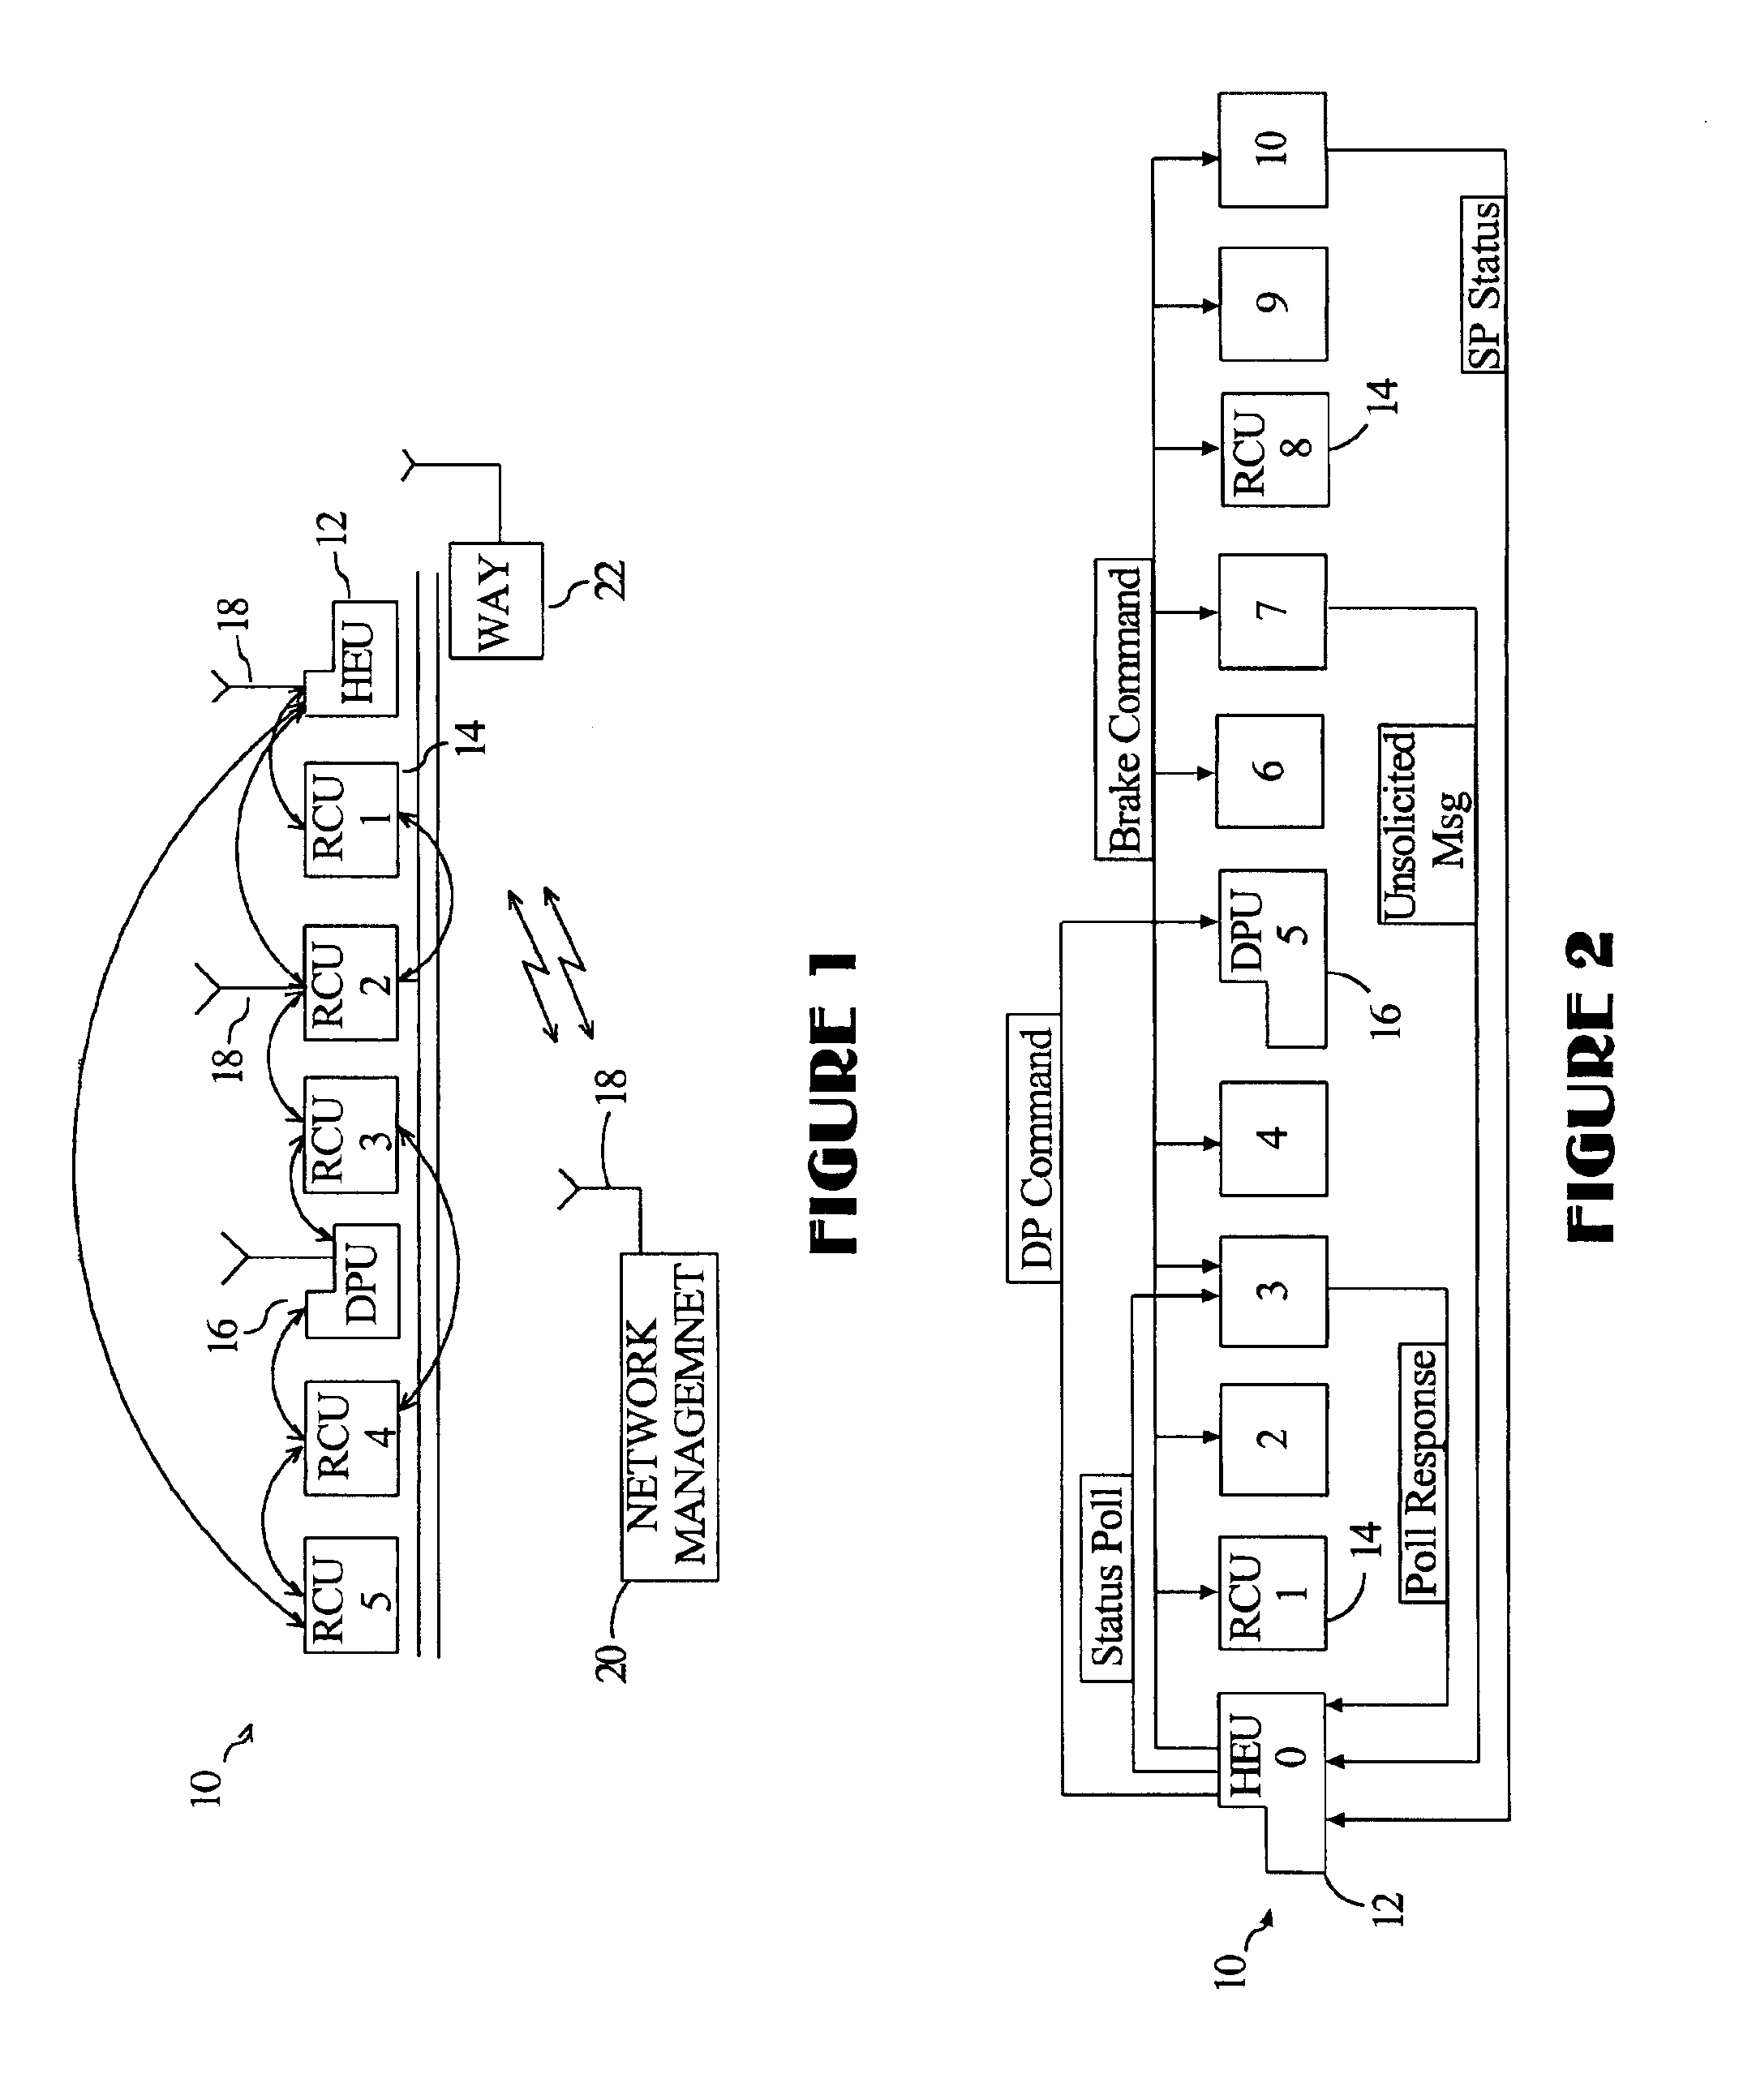 Communications system and method for interconnected networks having a linear topology, especially railways